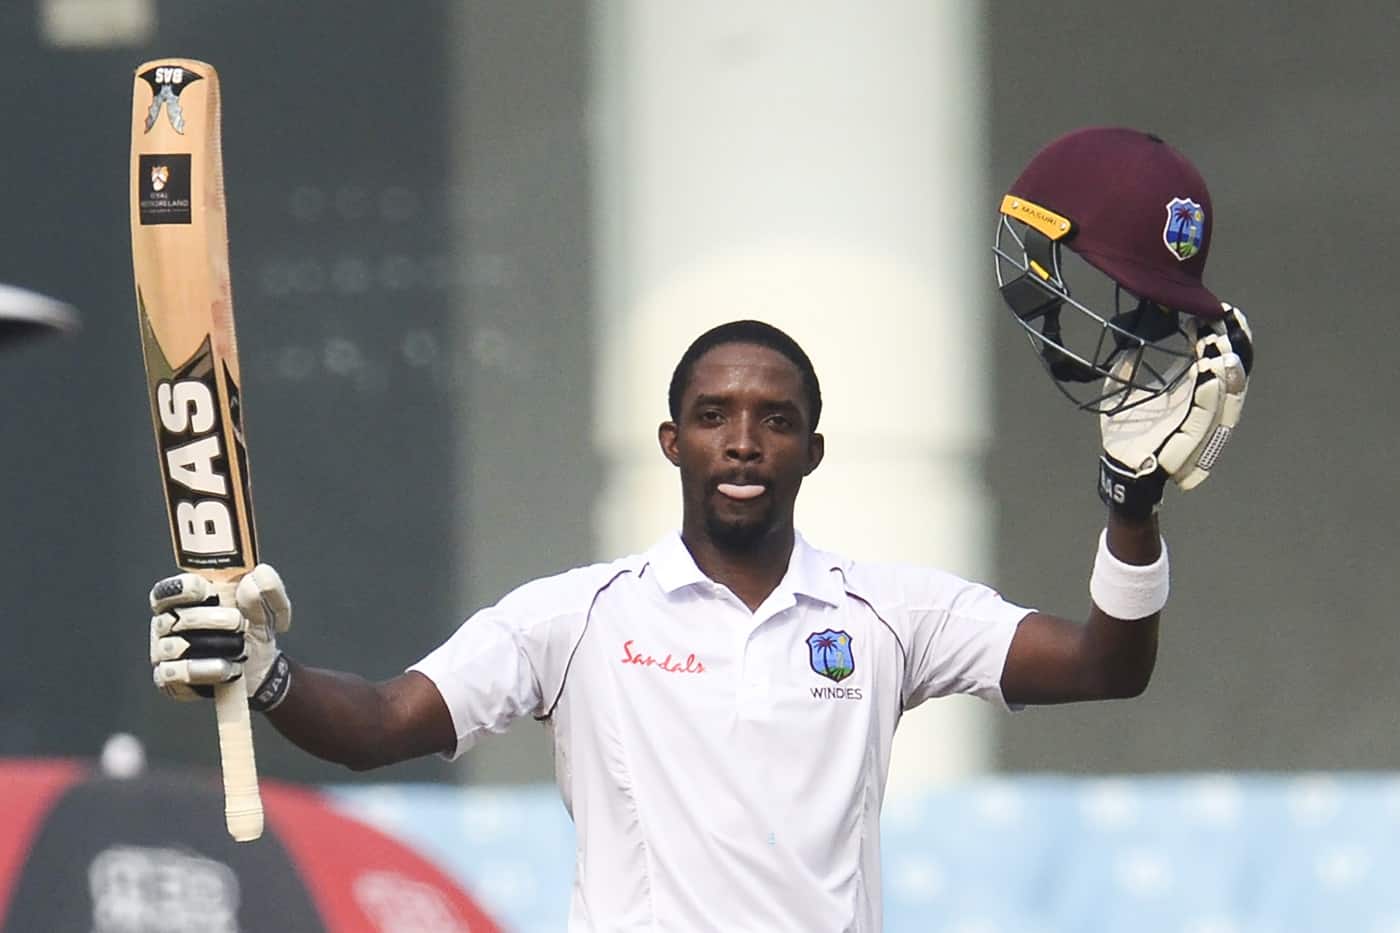 Shamarh Brooks West Indies Cricketer Age, Height, Wife, CPL, Stats